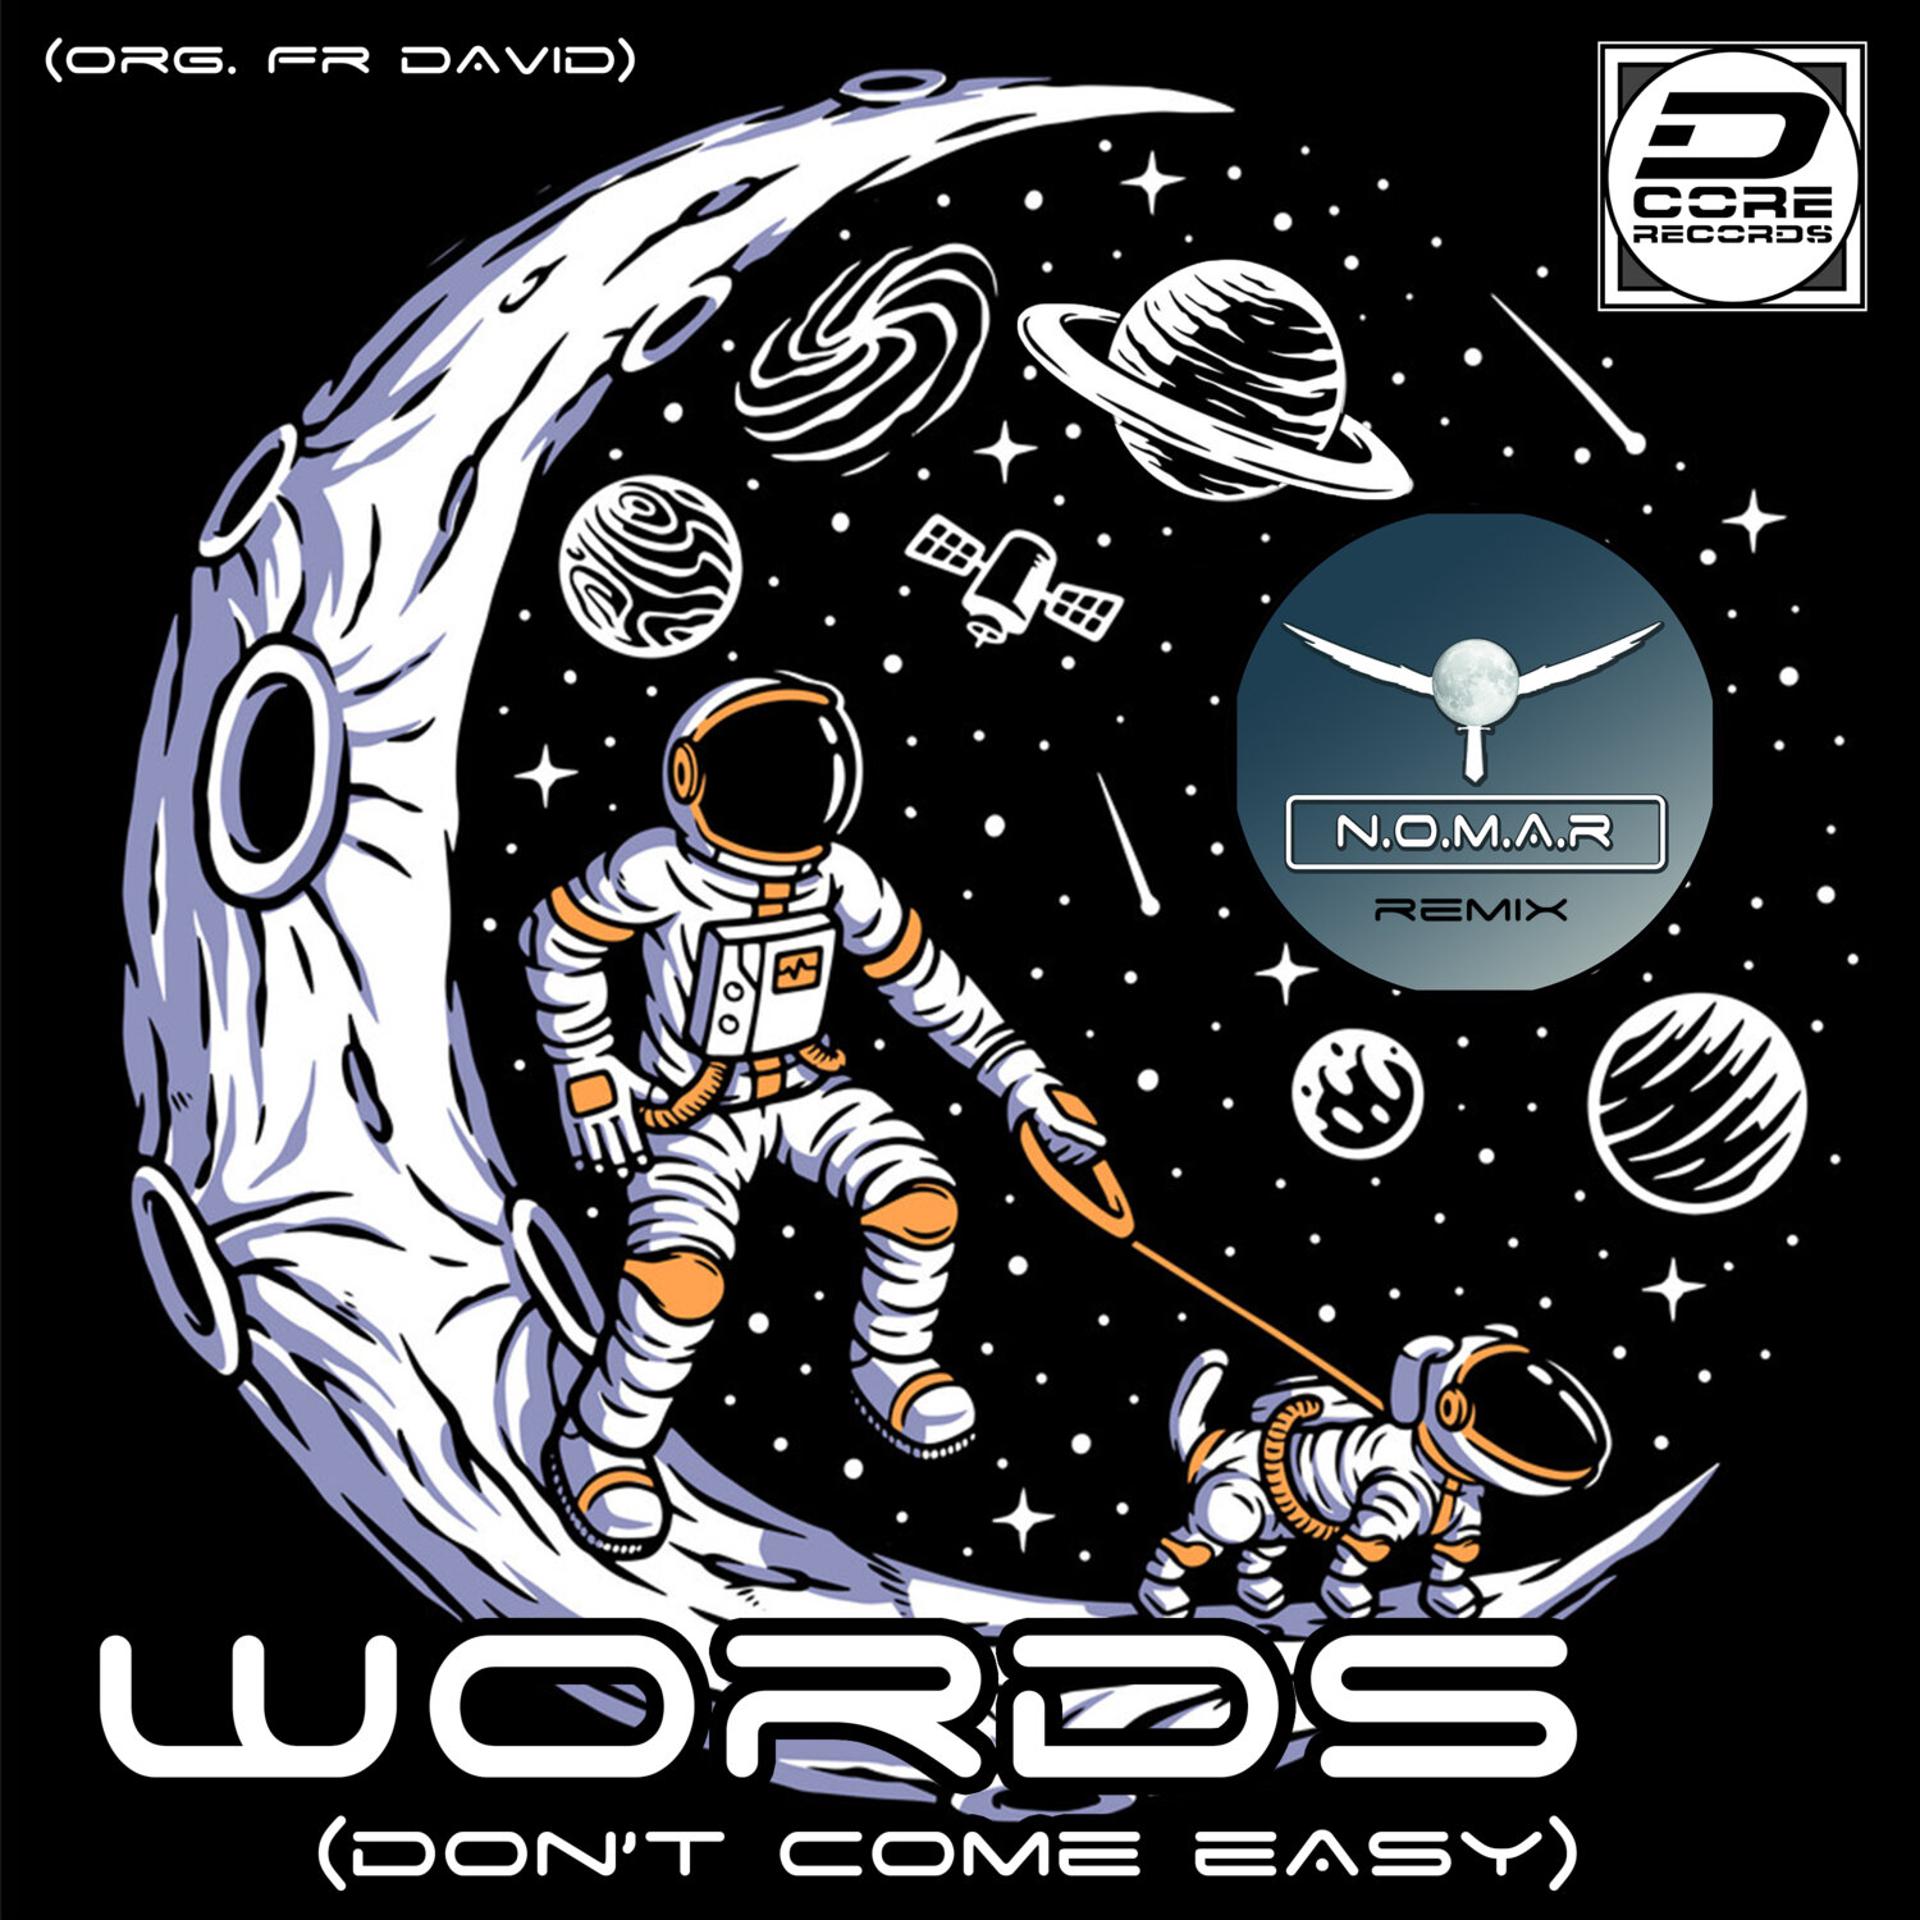 Постер альбома Words (Don't Come Easy - ReMix) (org. by FR David)